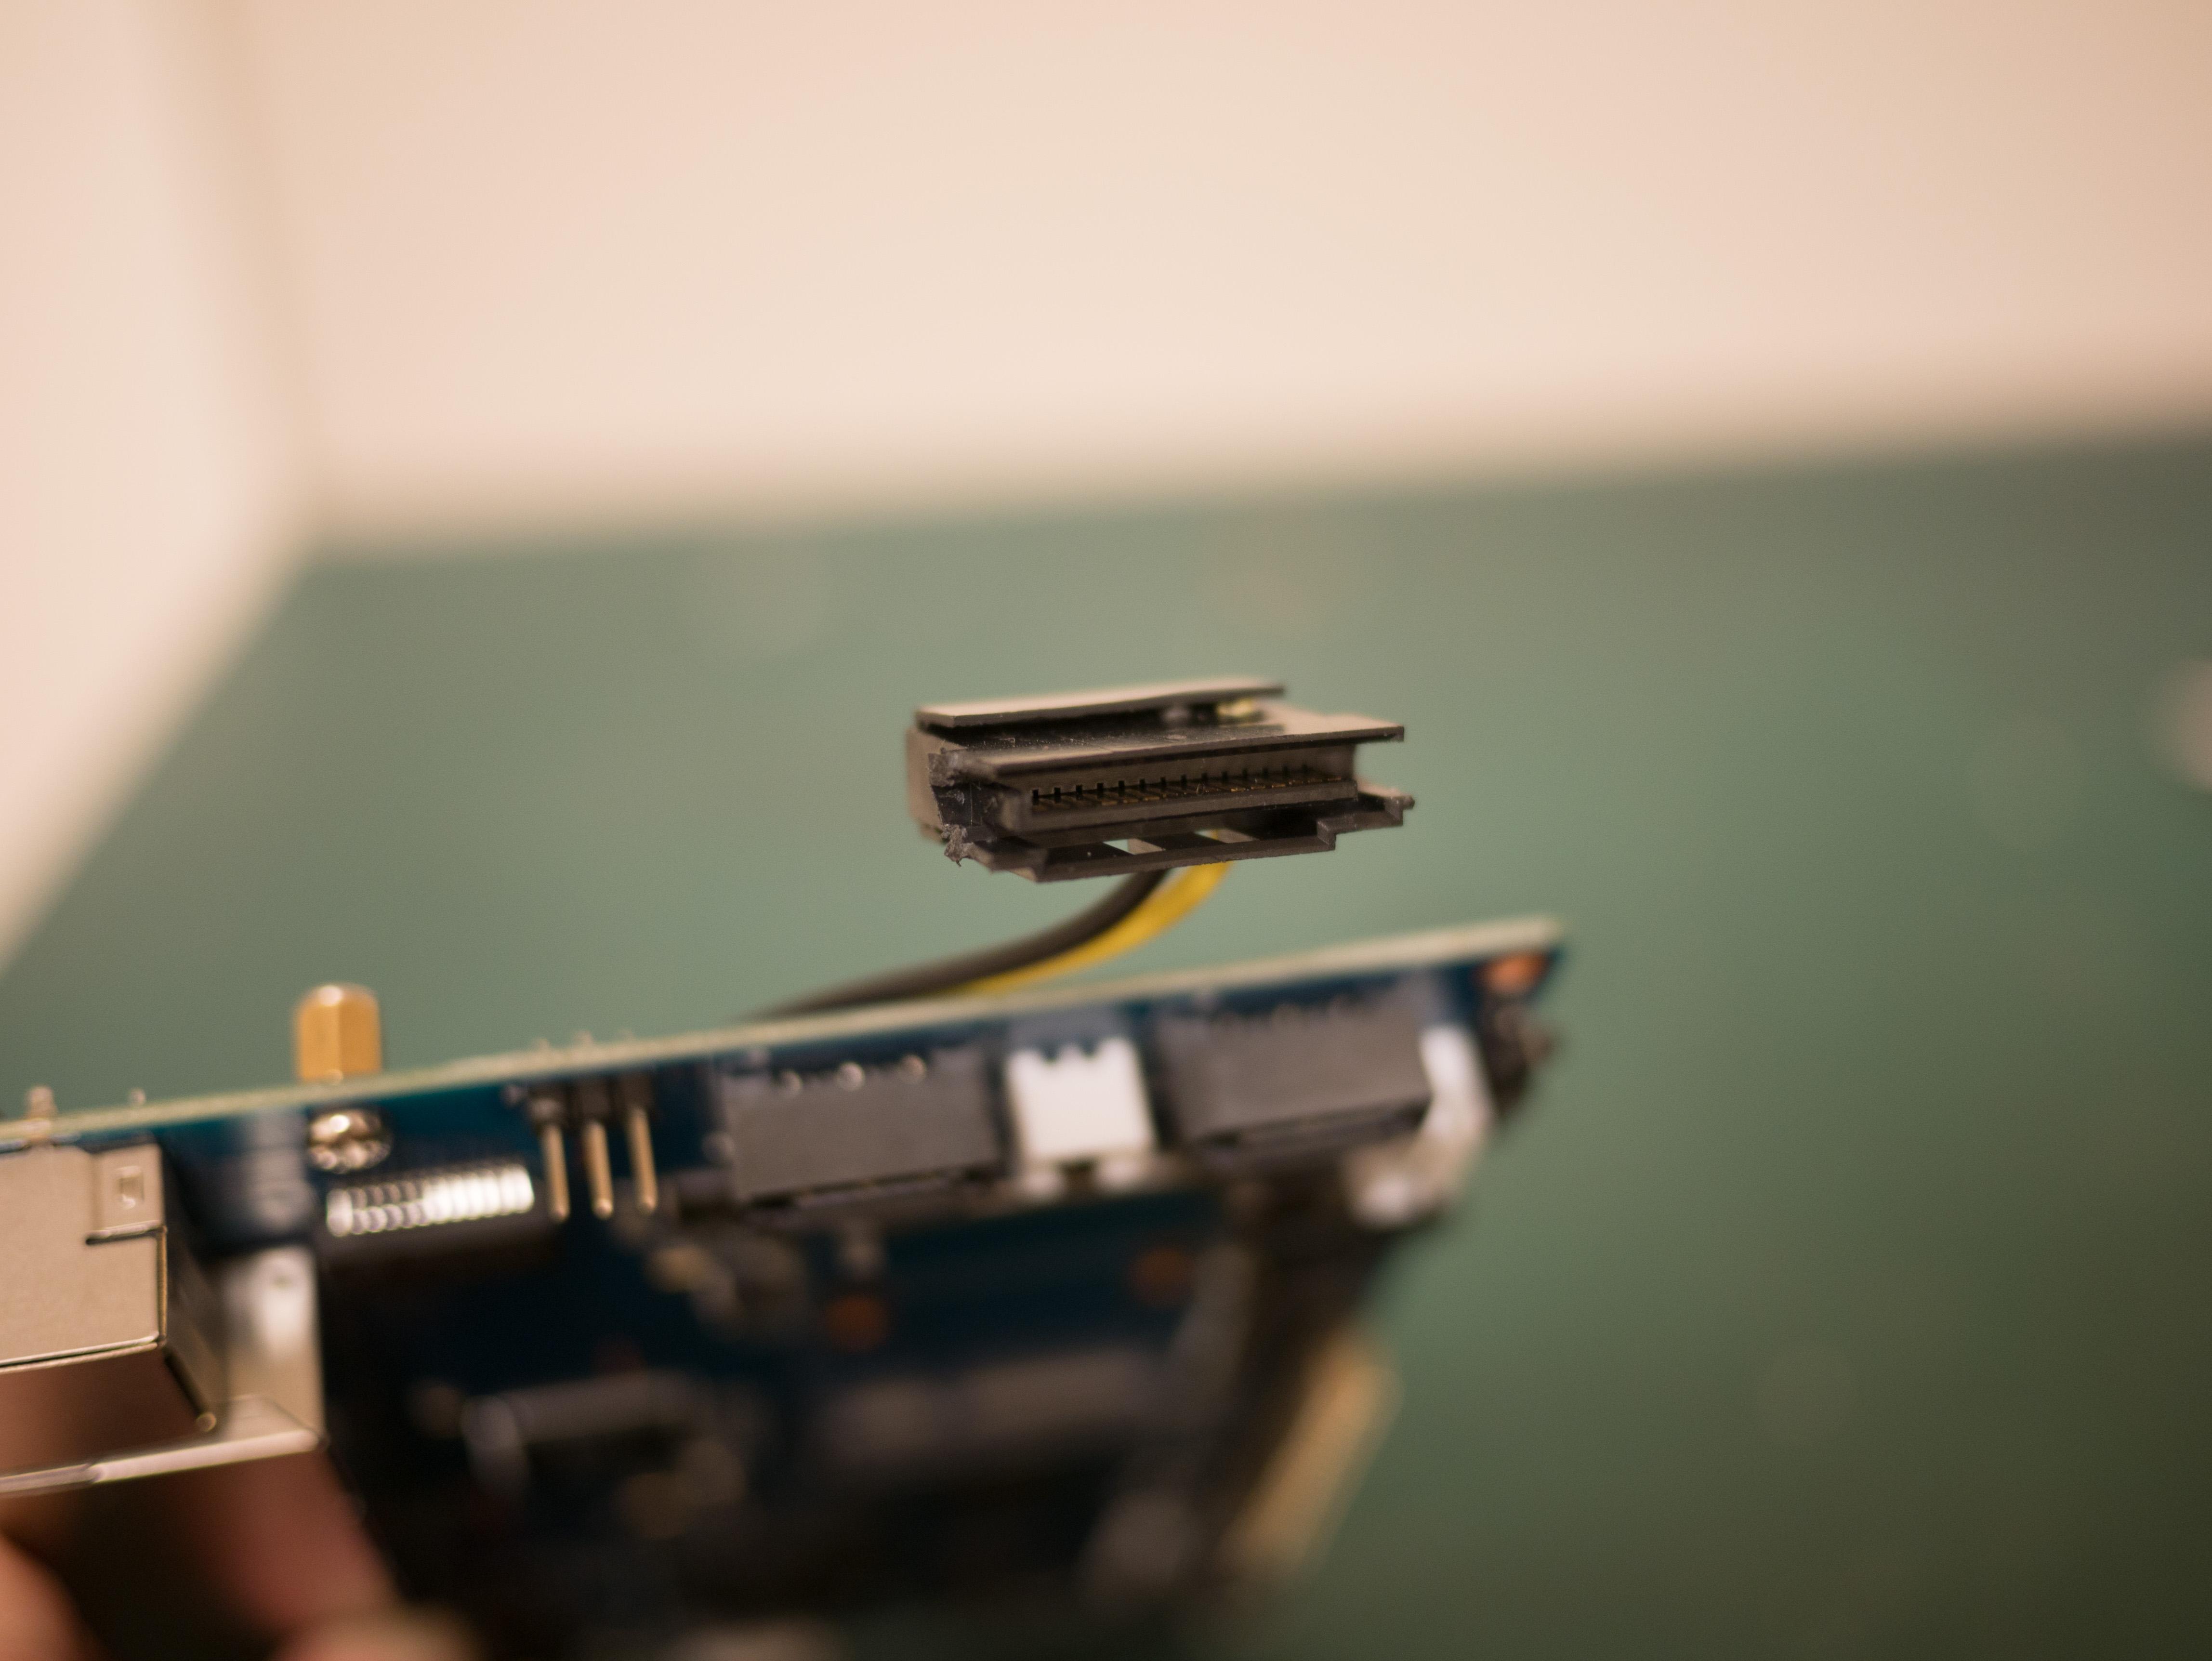 Male SATA power connector with snapped off edges